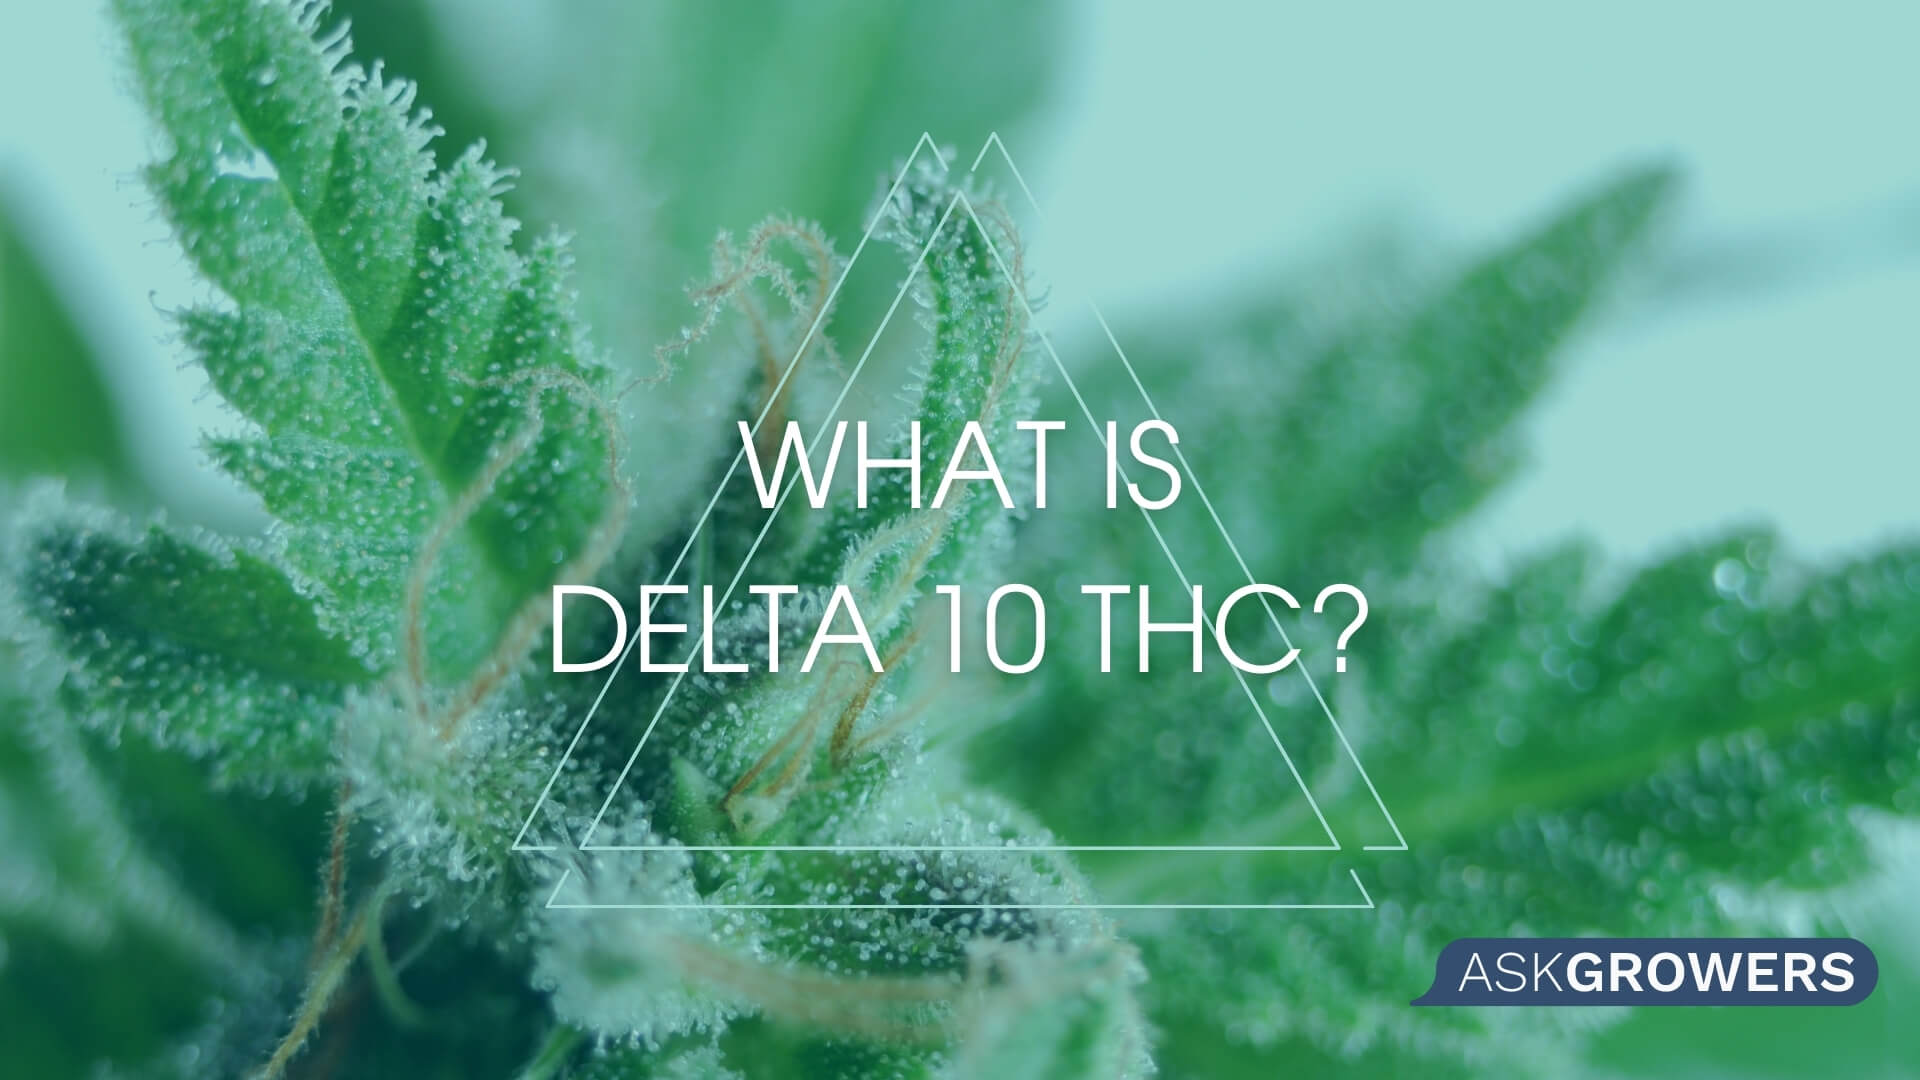 What You Need to Know About the New Tetrahydrocannabinol Delta-10